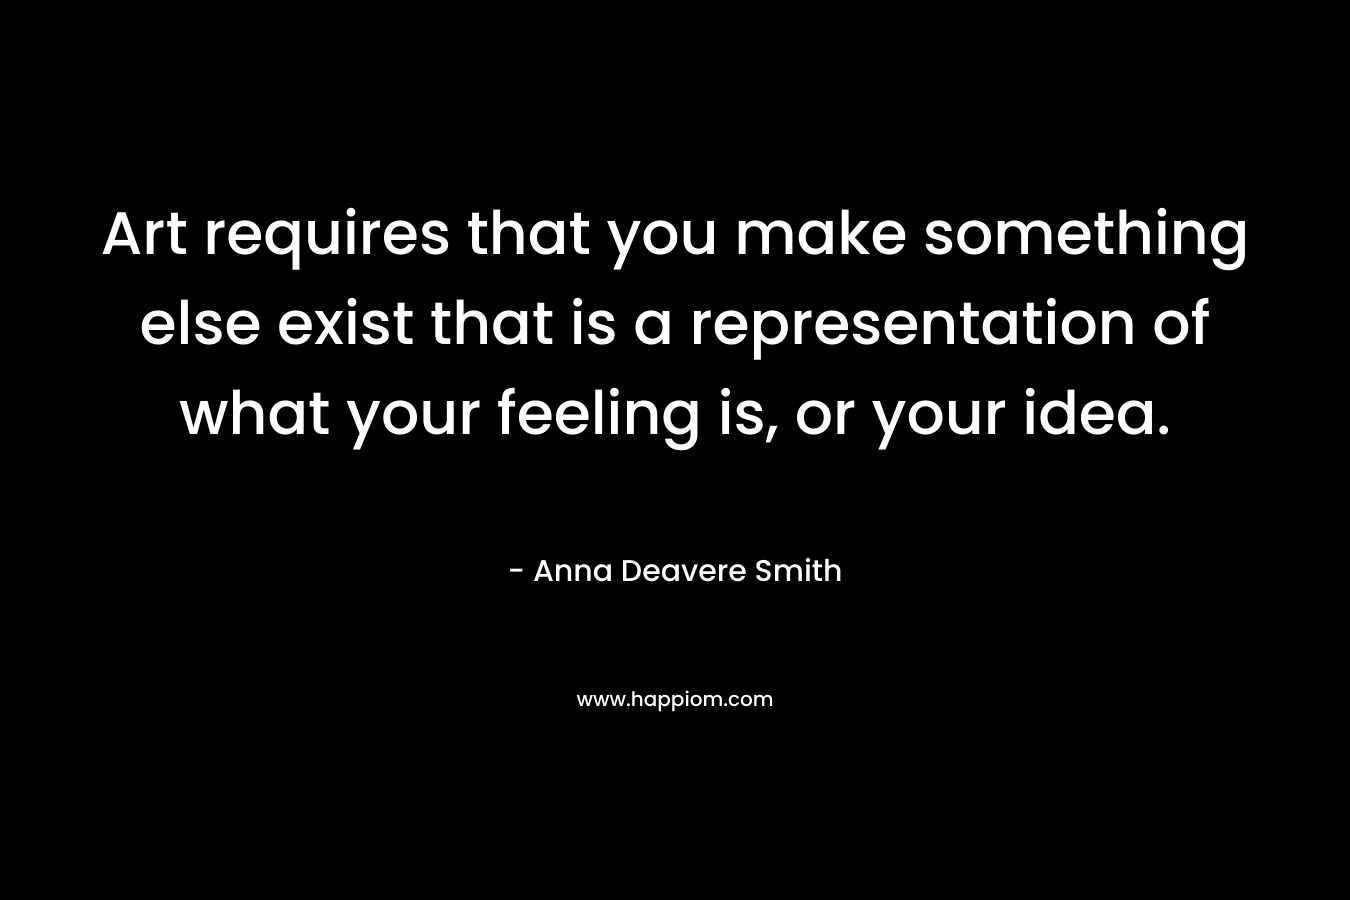 Art requires that you make something else exist that is a representation of what your feeling is, or your idea. – Anna Deavere Smith